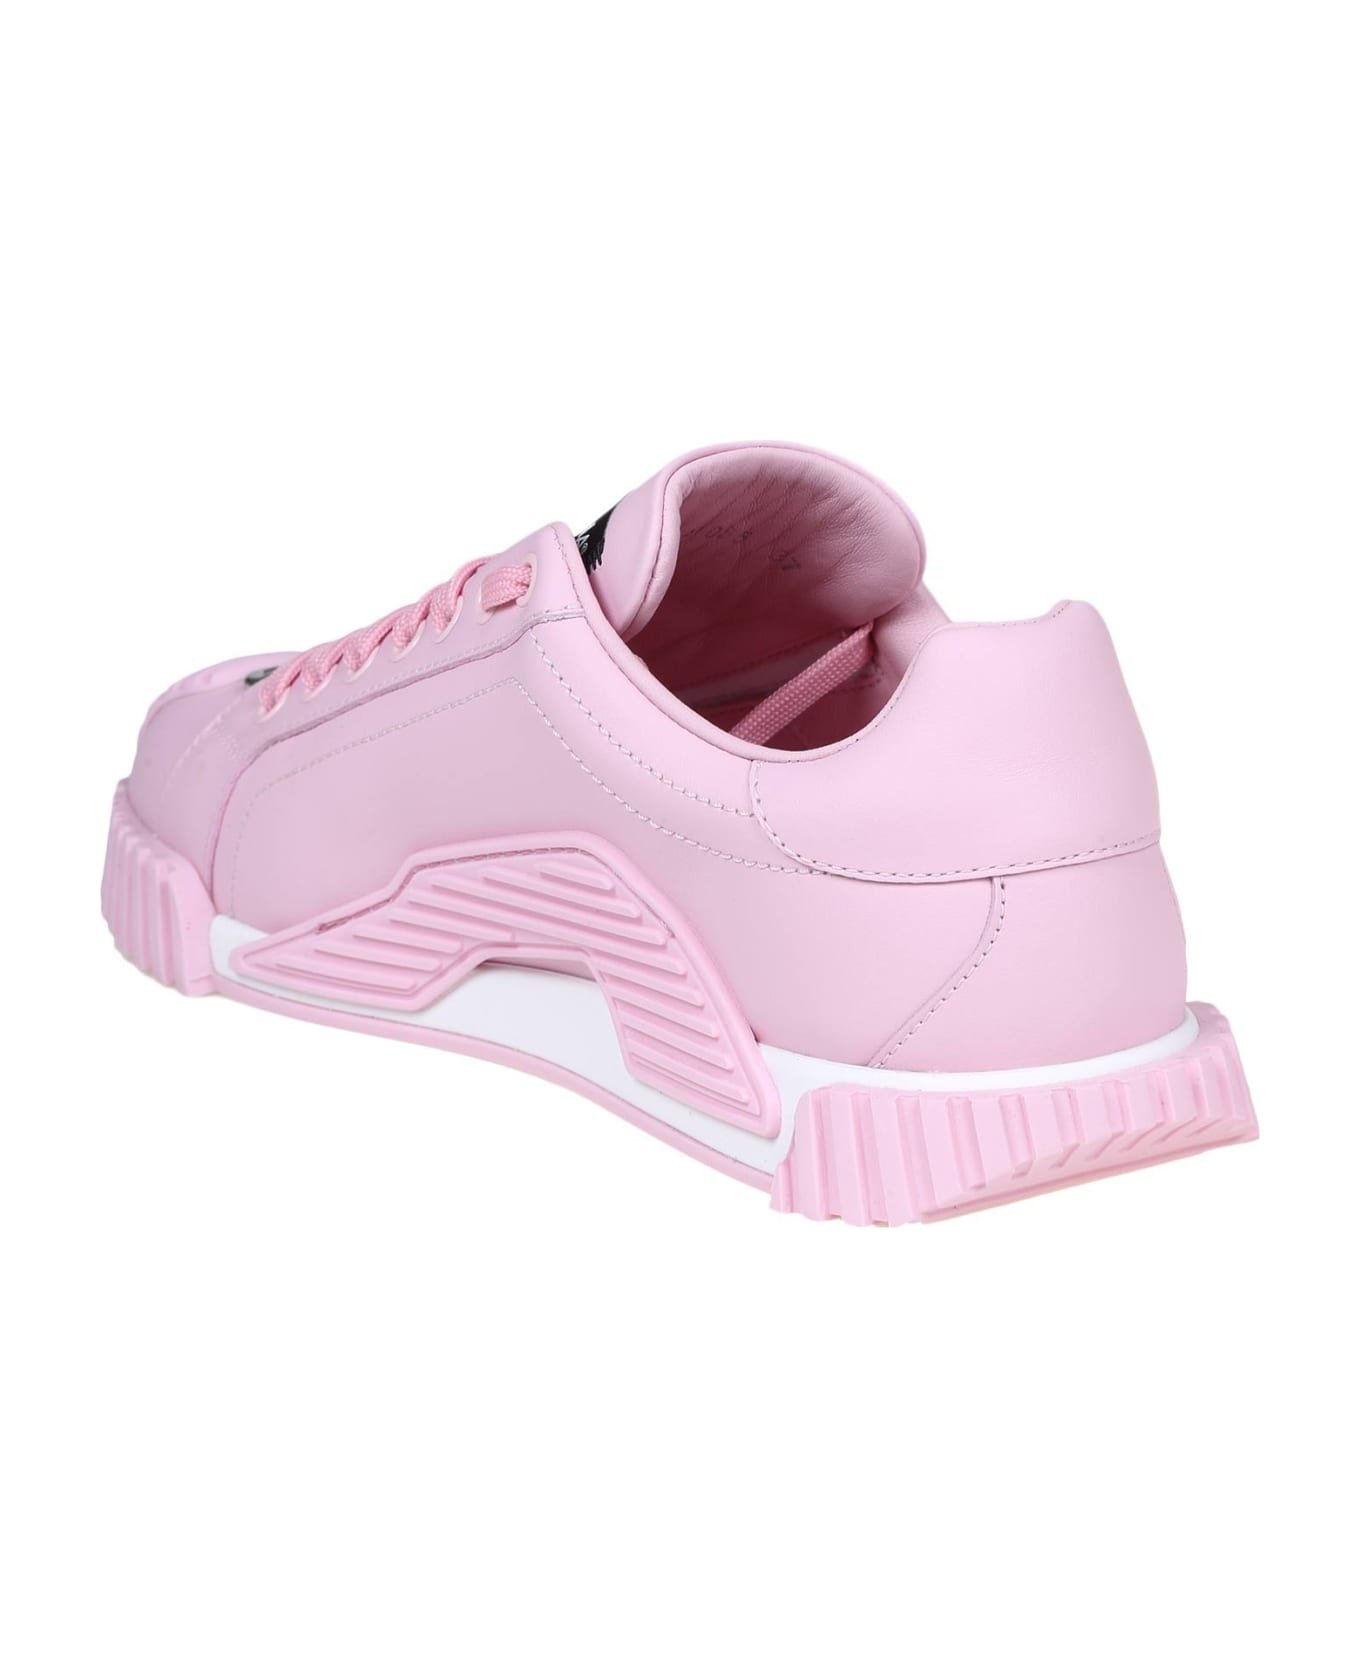 Dolce & Gabbana Sneakers - PINK